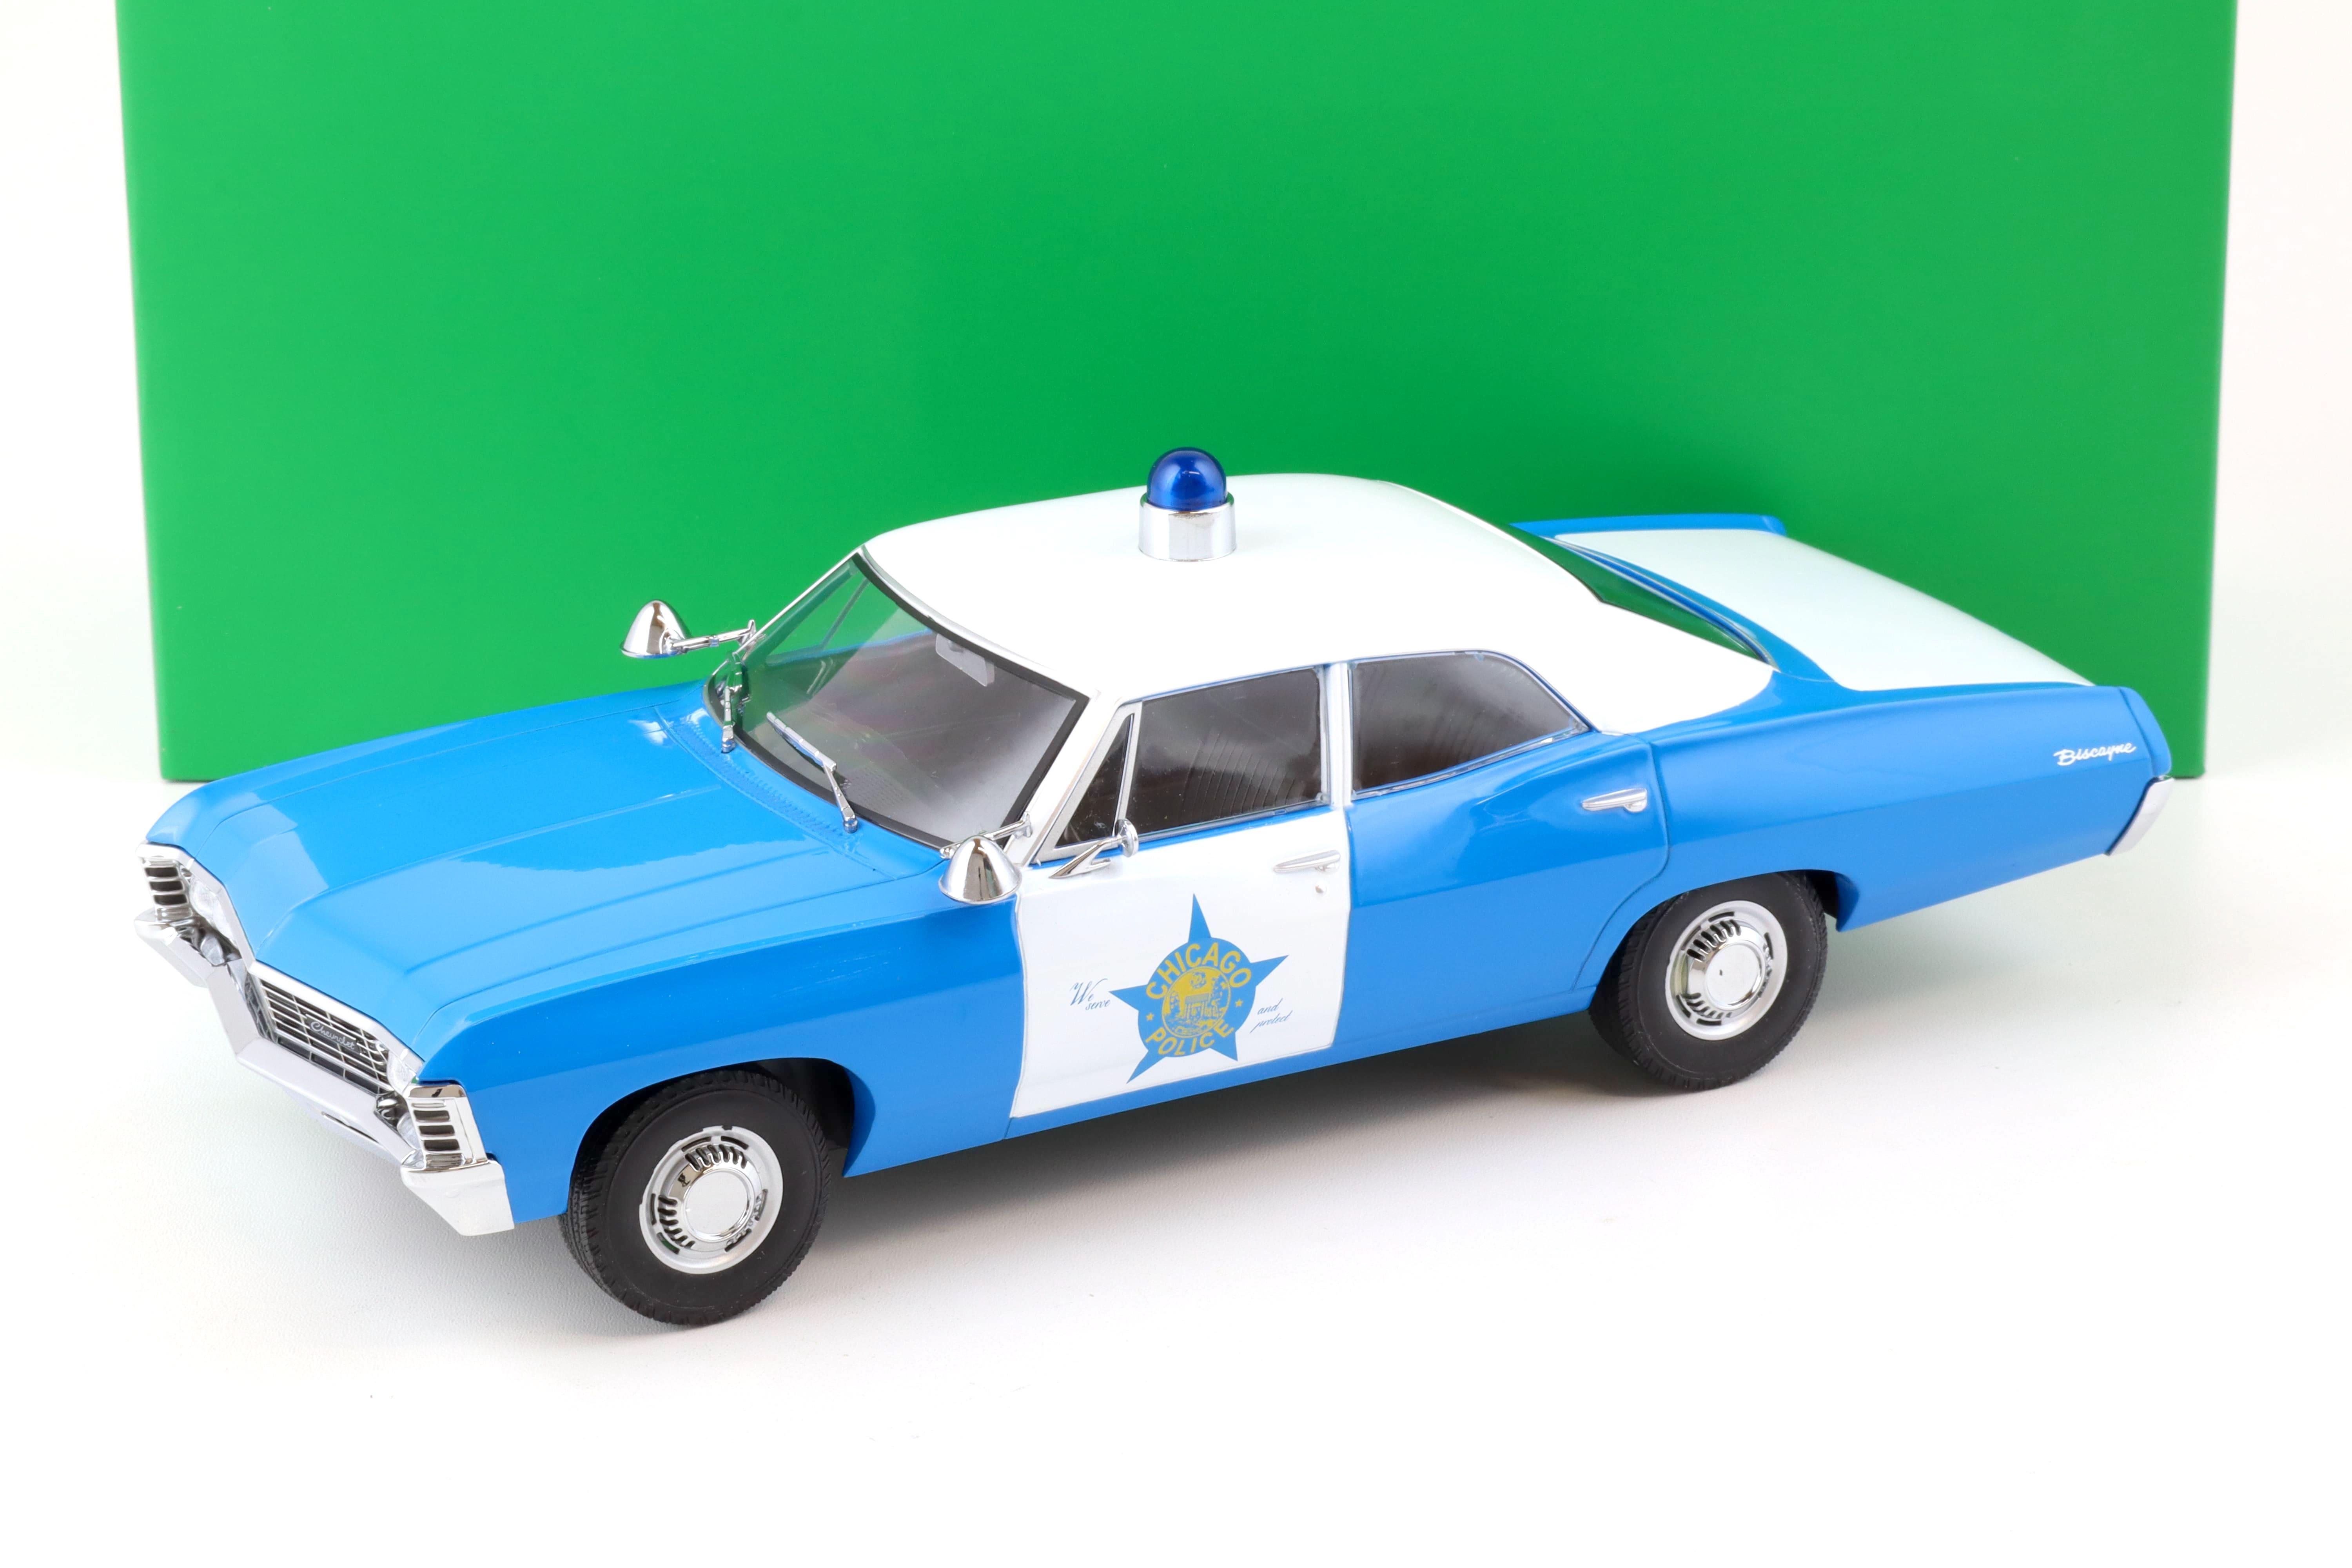 1:18 Greenlight 1967 Chevrolet Biscayne Police Car Chicago CPD blue/ white